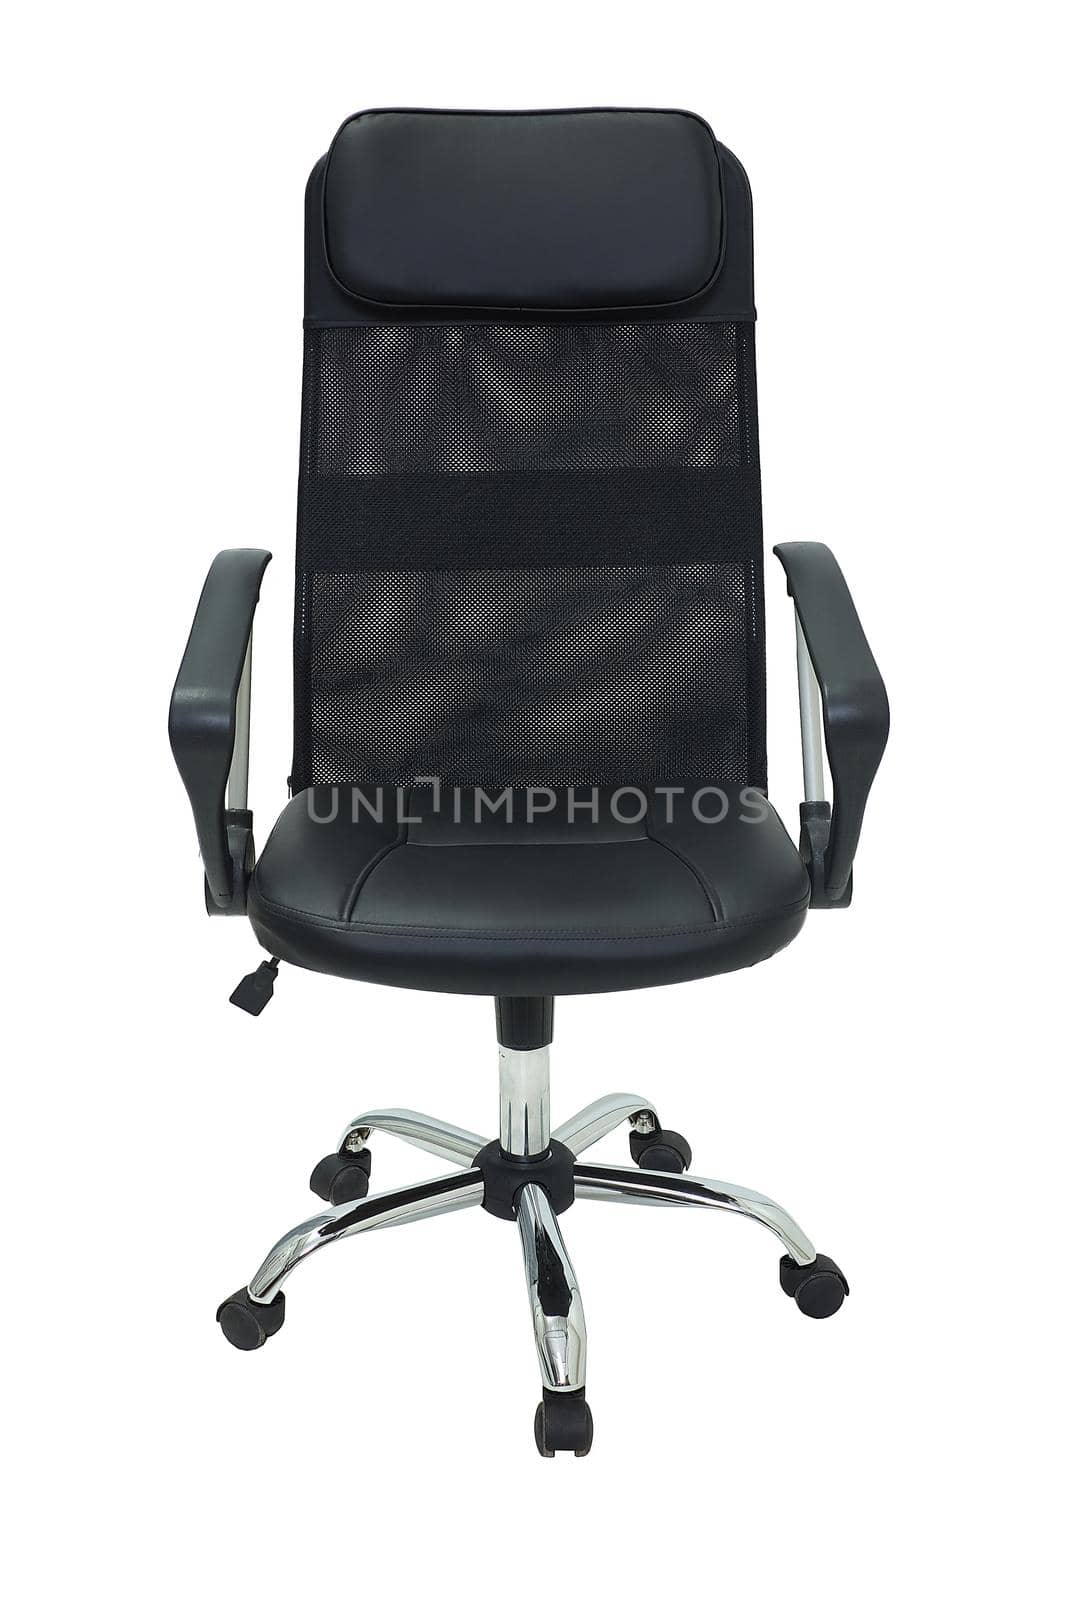 black office fabric armchair on wheels isolated on white background, front view. modern furniture, interior, home design